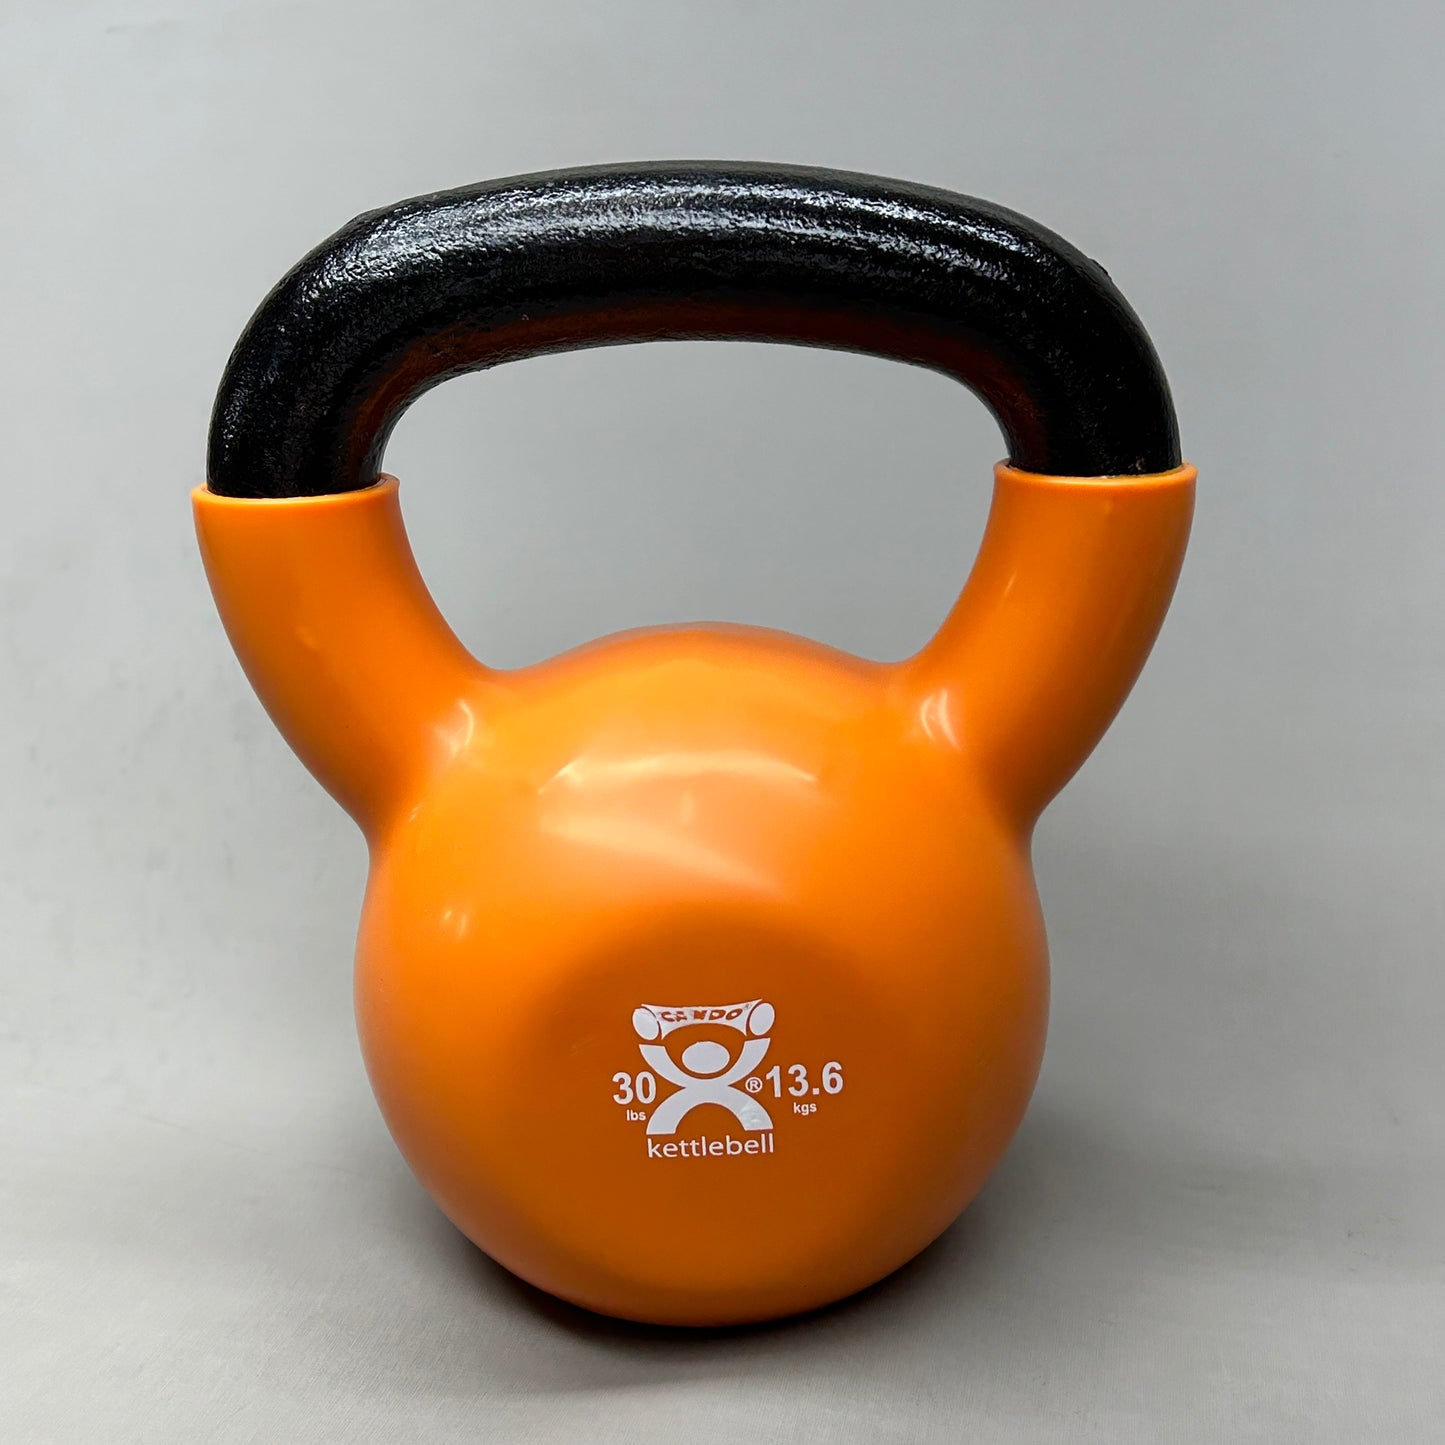 CANDO Vinyl Coated Kettlebell Weight 30 lb Gold (New)